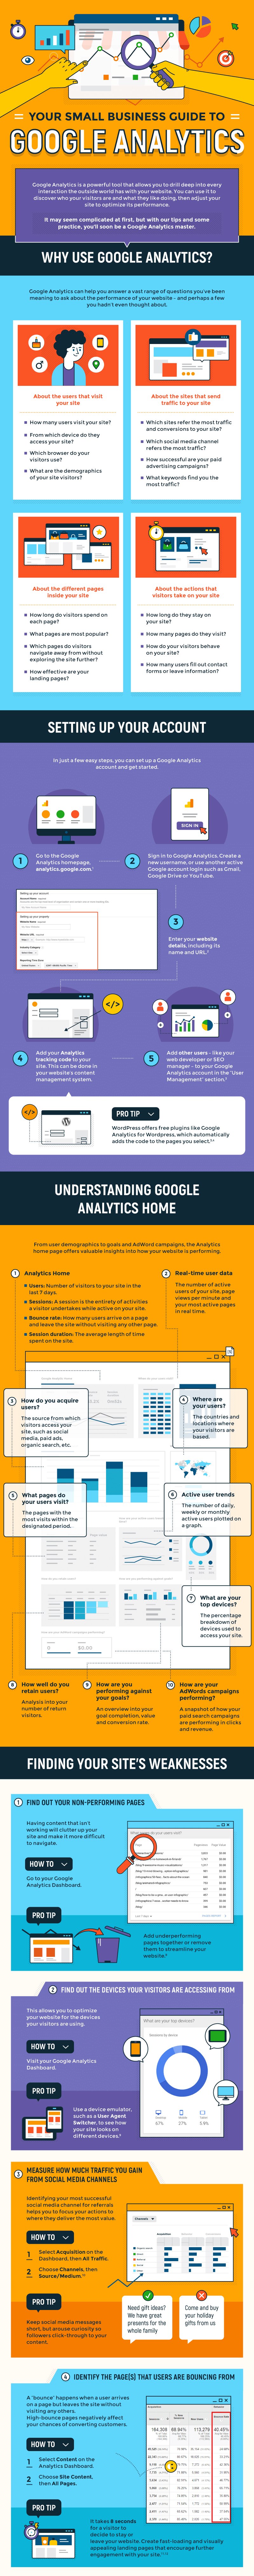 A Small Business Guide To Google Analytics